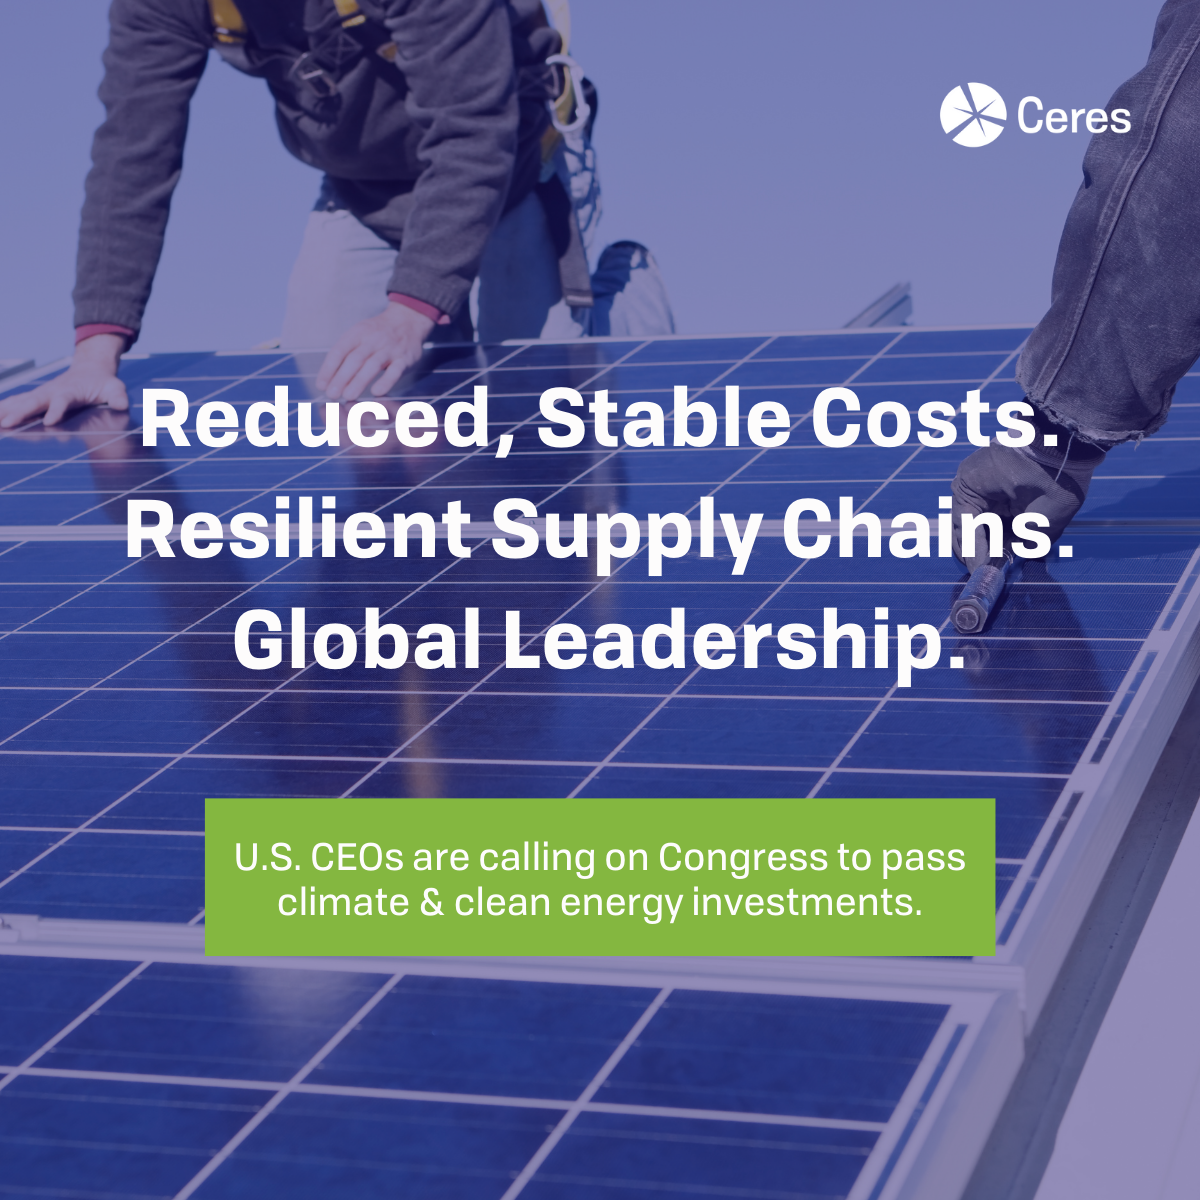 "Reduced, Stable Costs. Resilient Supply Chains. Global Leadership" 